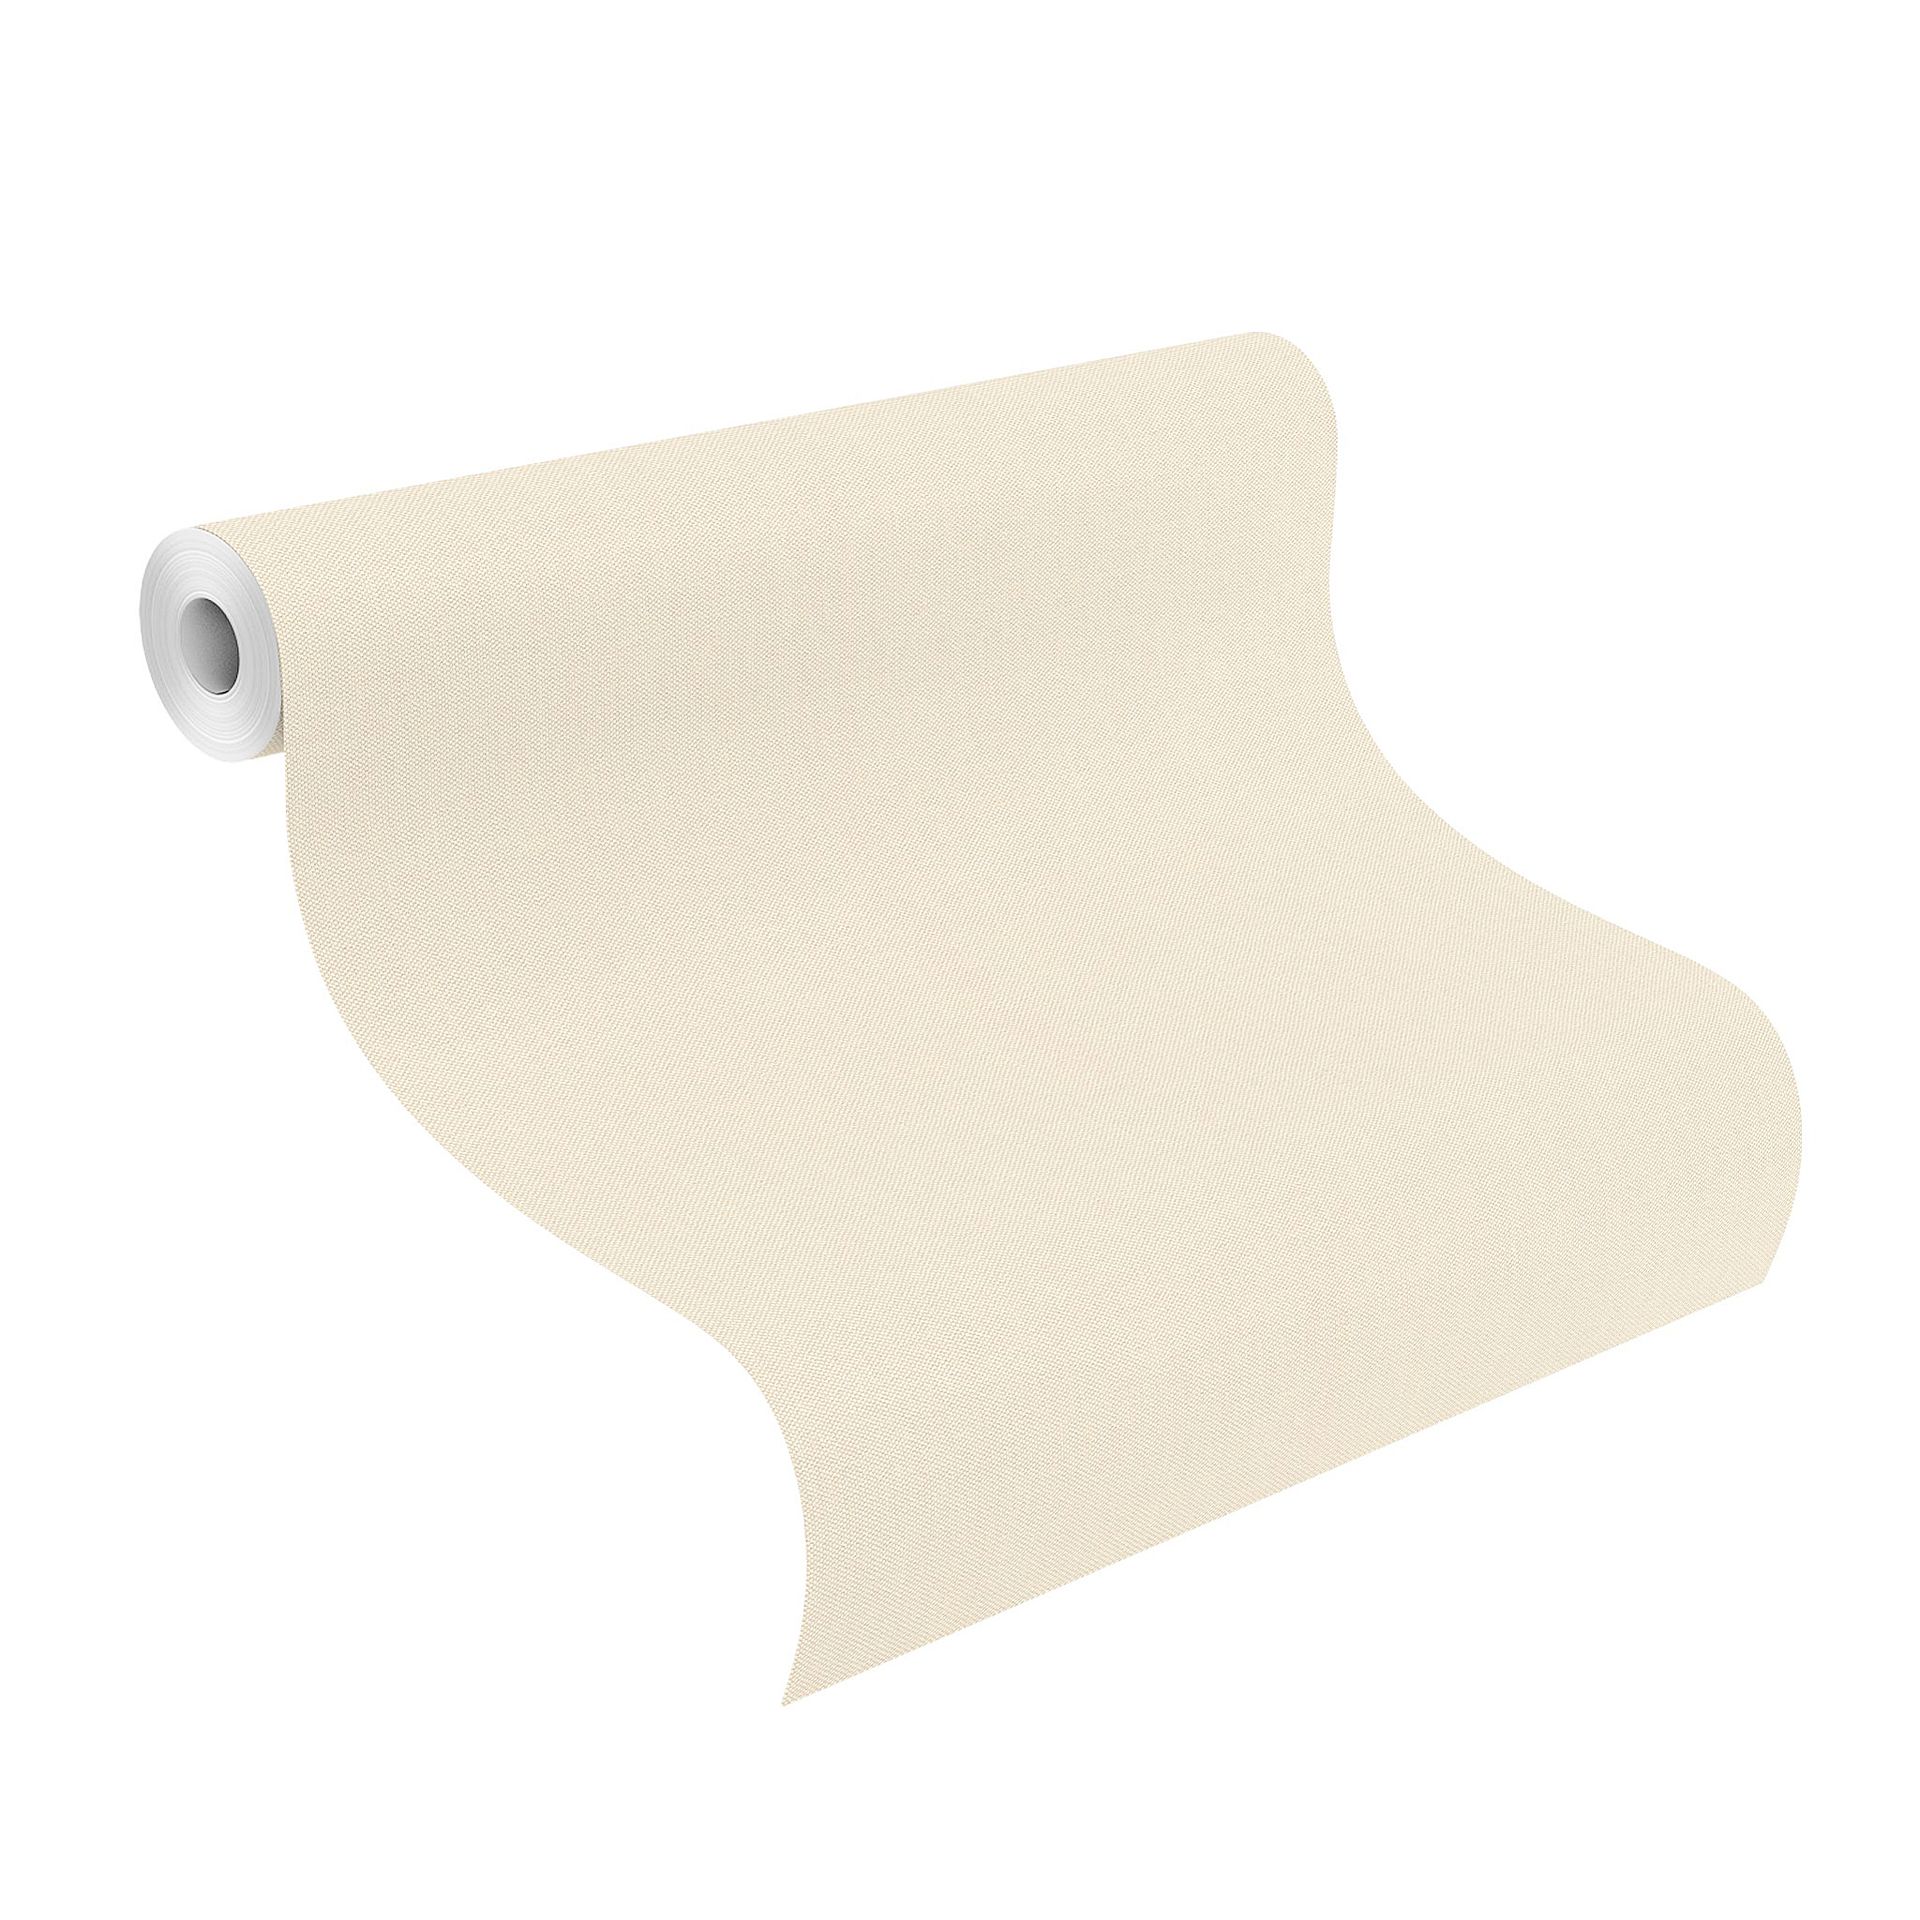 Rasch Poetry 424041 Beige universell